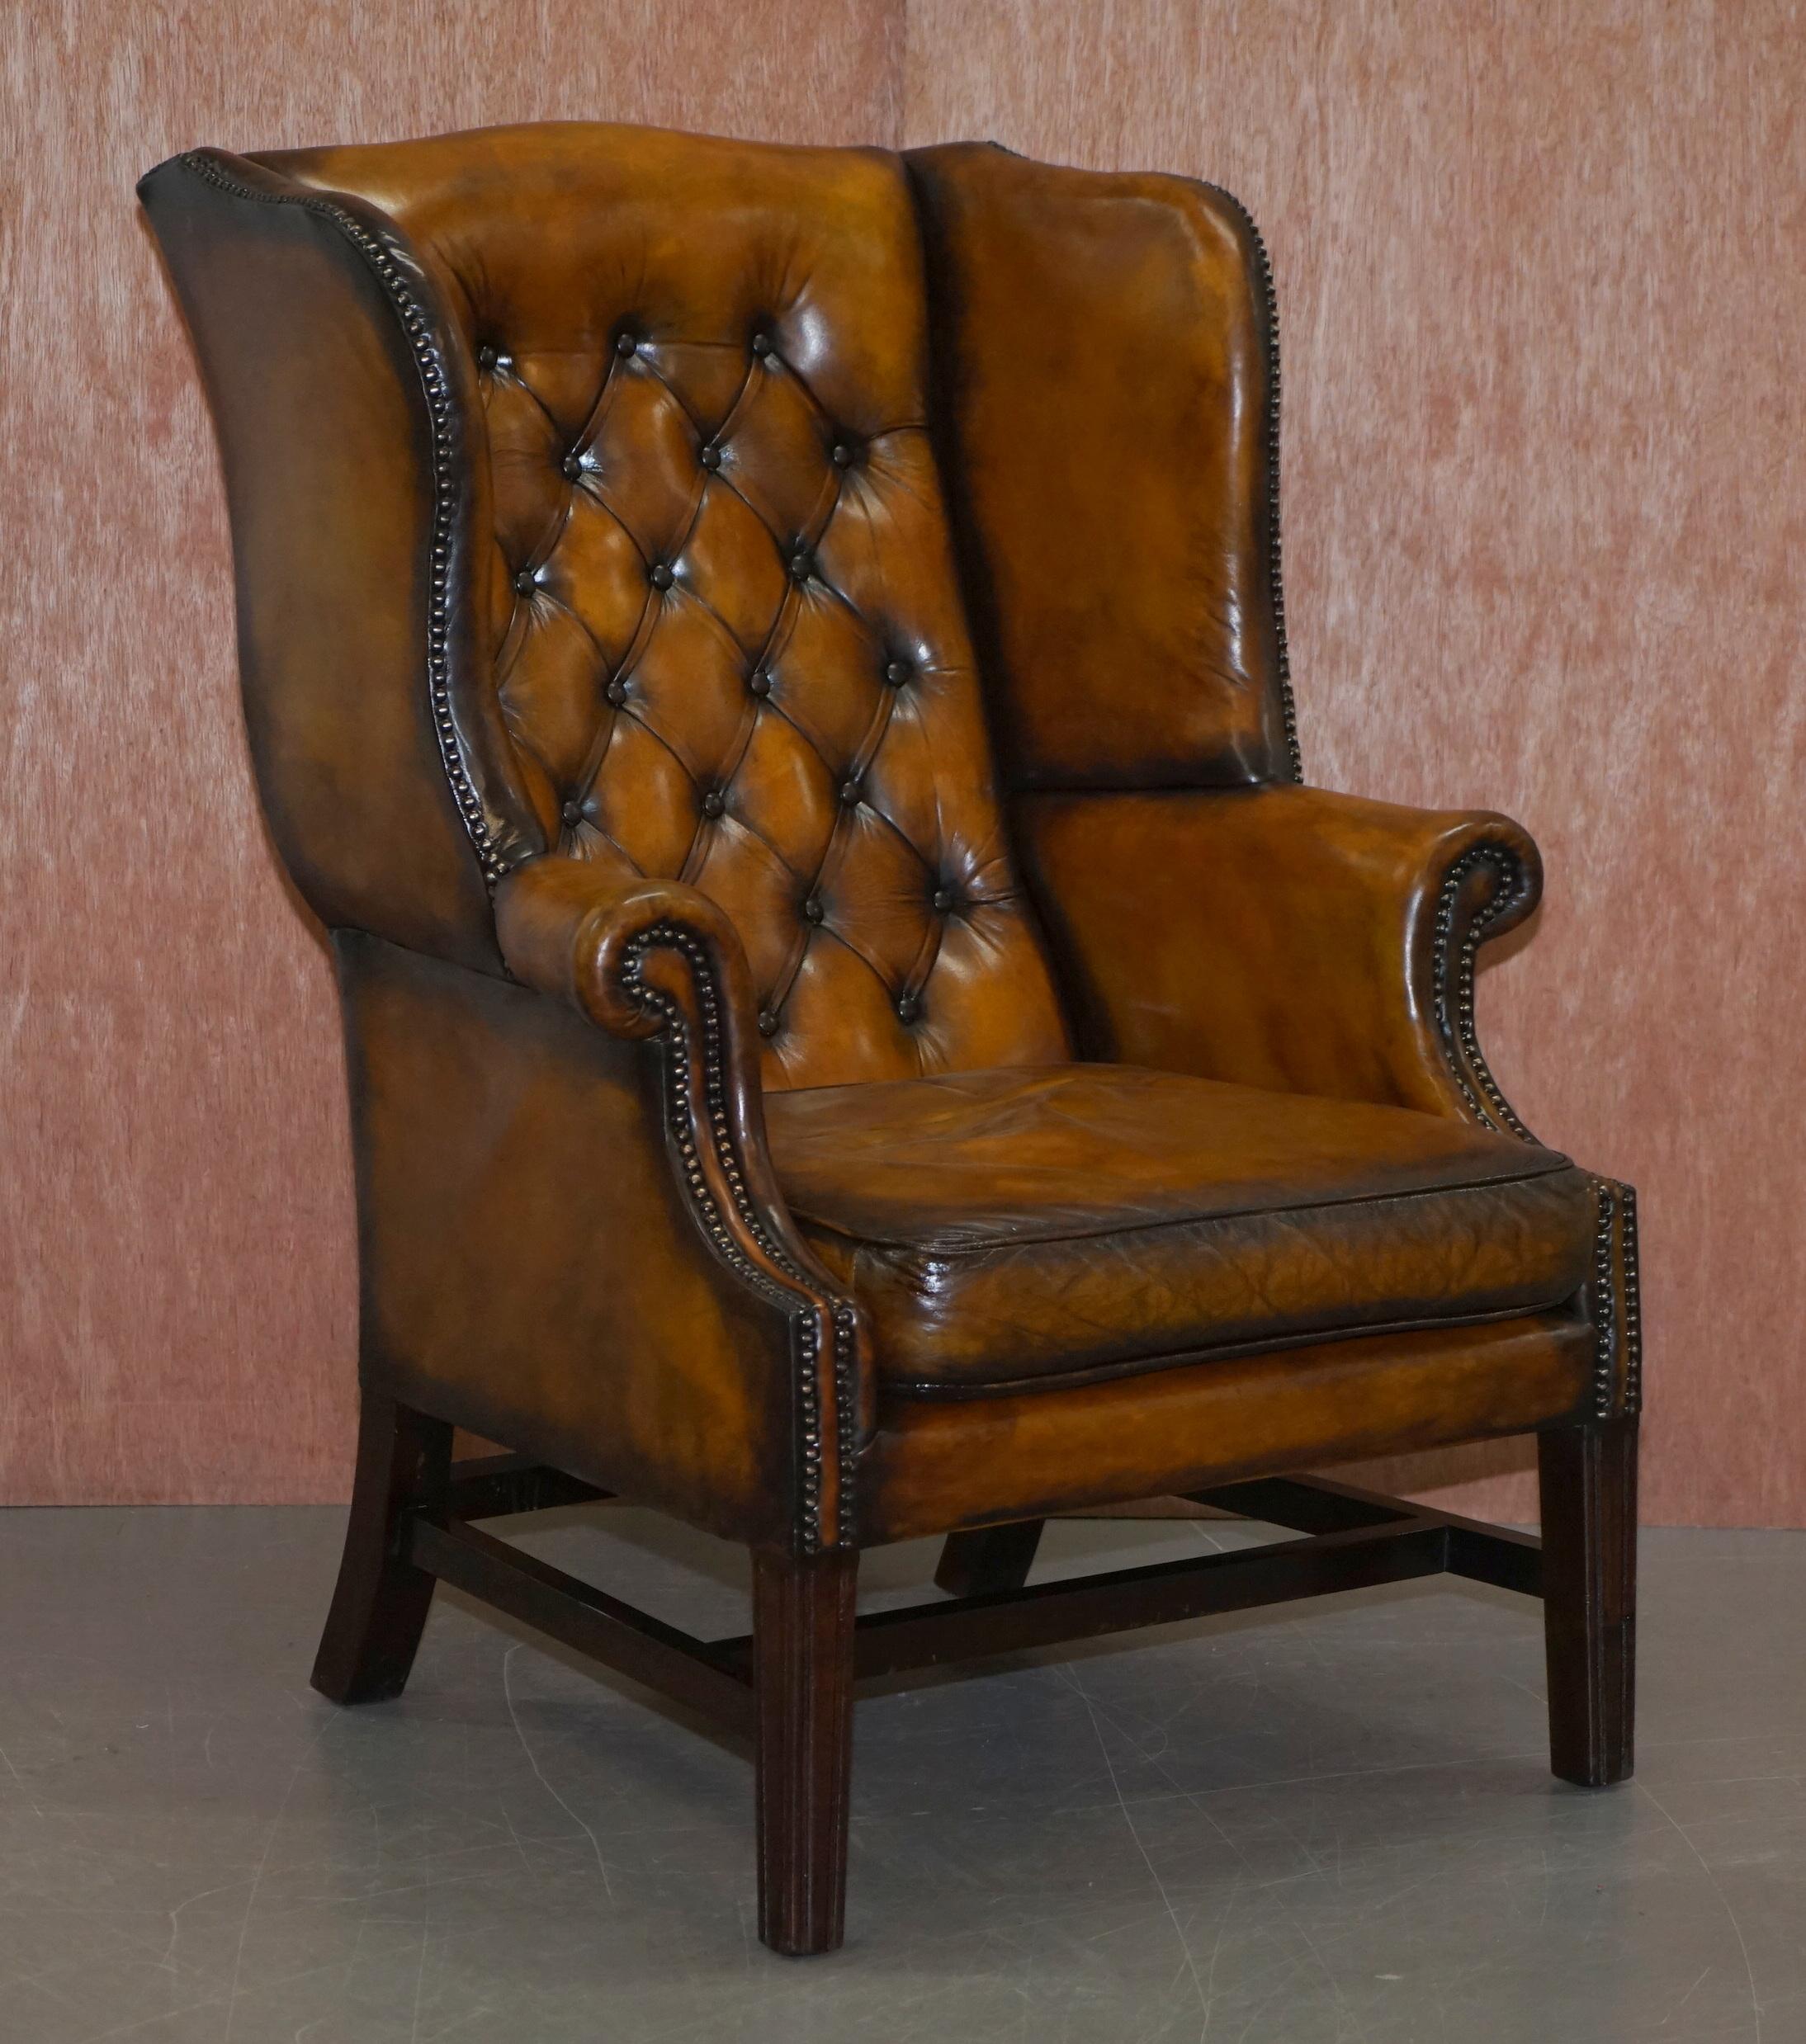 We are delighted to offer for sale this stunning pair of His & Her's Chesterfield fully restored vintage wingback armchairs in Whisky brown leather with thick heavy feather filled cushions

A good looking and comfortable pair of coil sprung